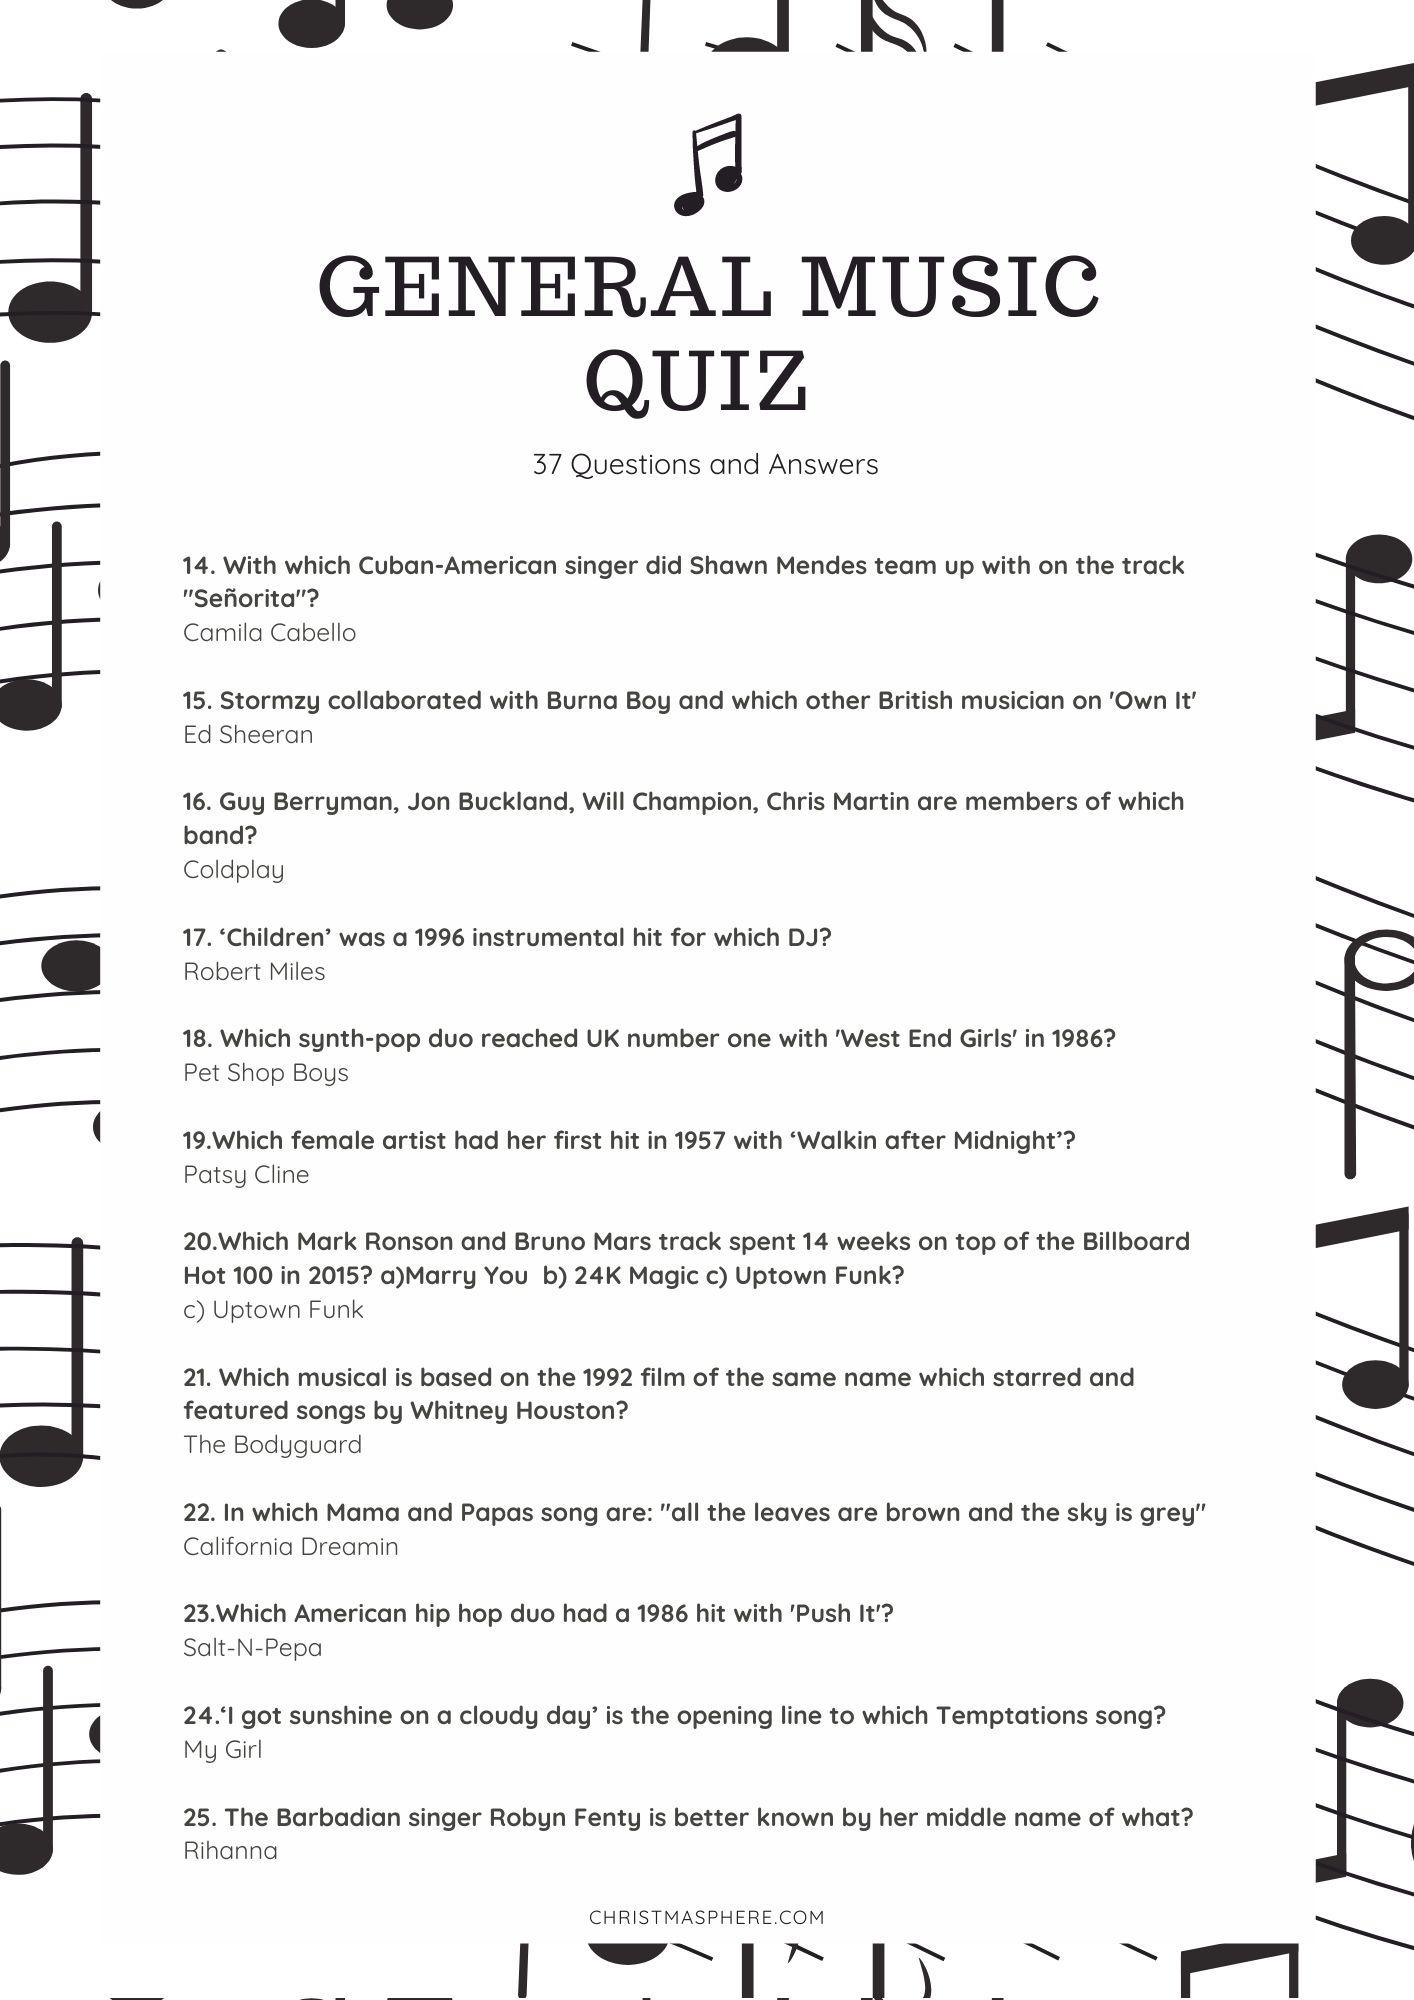 Questions about music. Music Quiz.